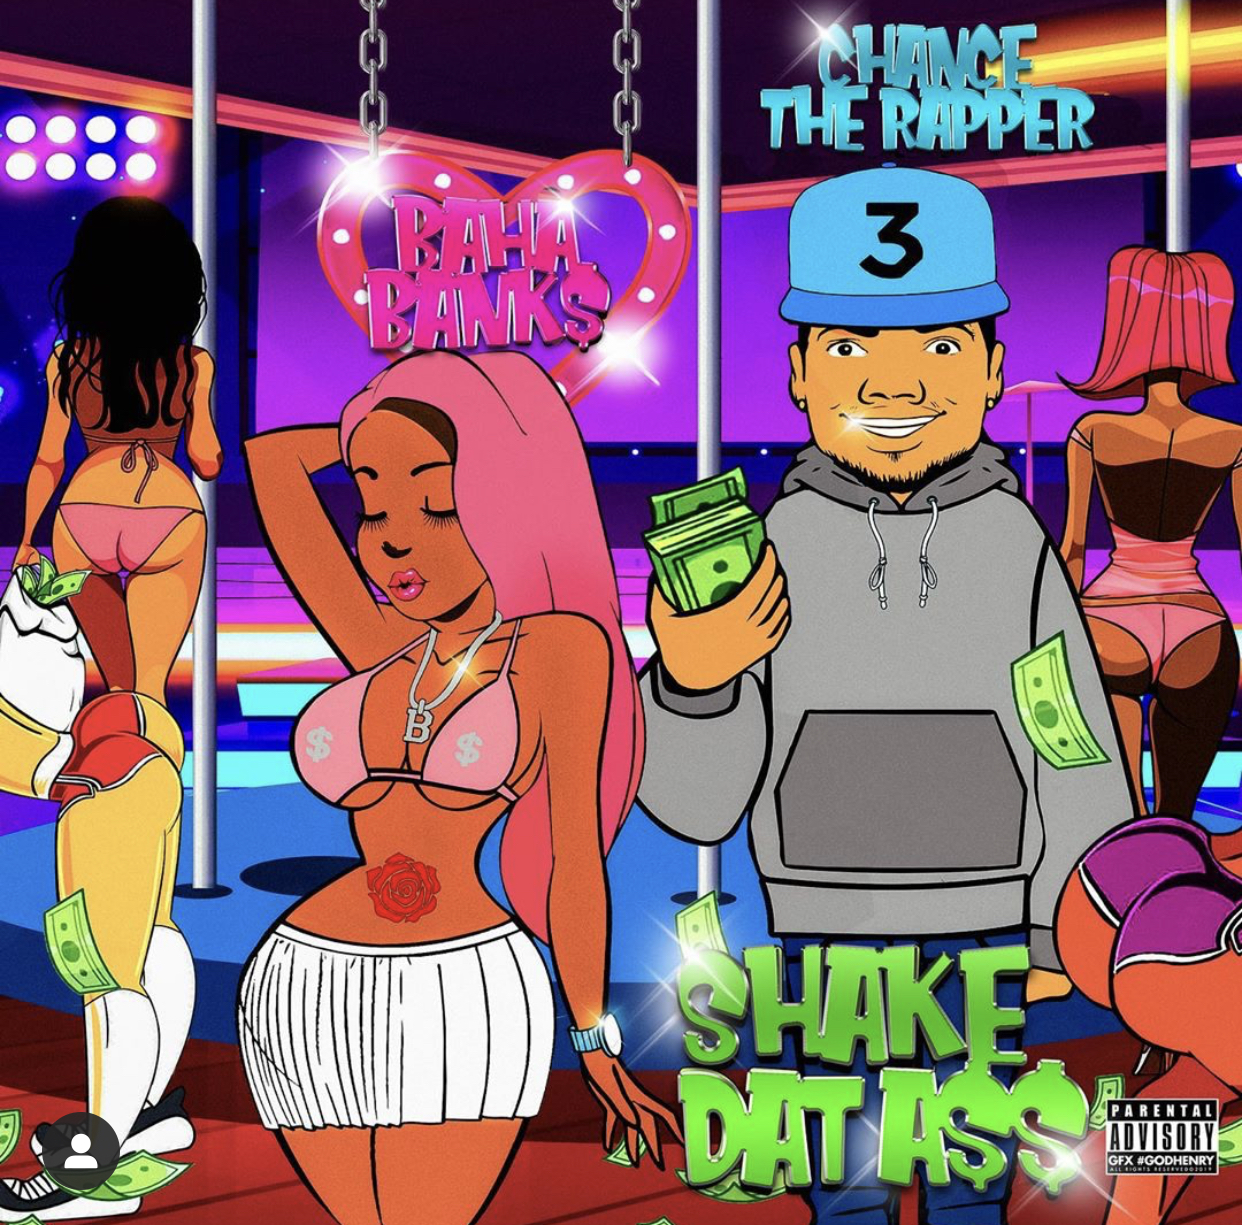 Baha Bank$ &; Chance The Rapper Drop A Video For “Shade Dat A$$”